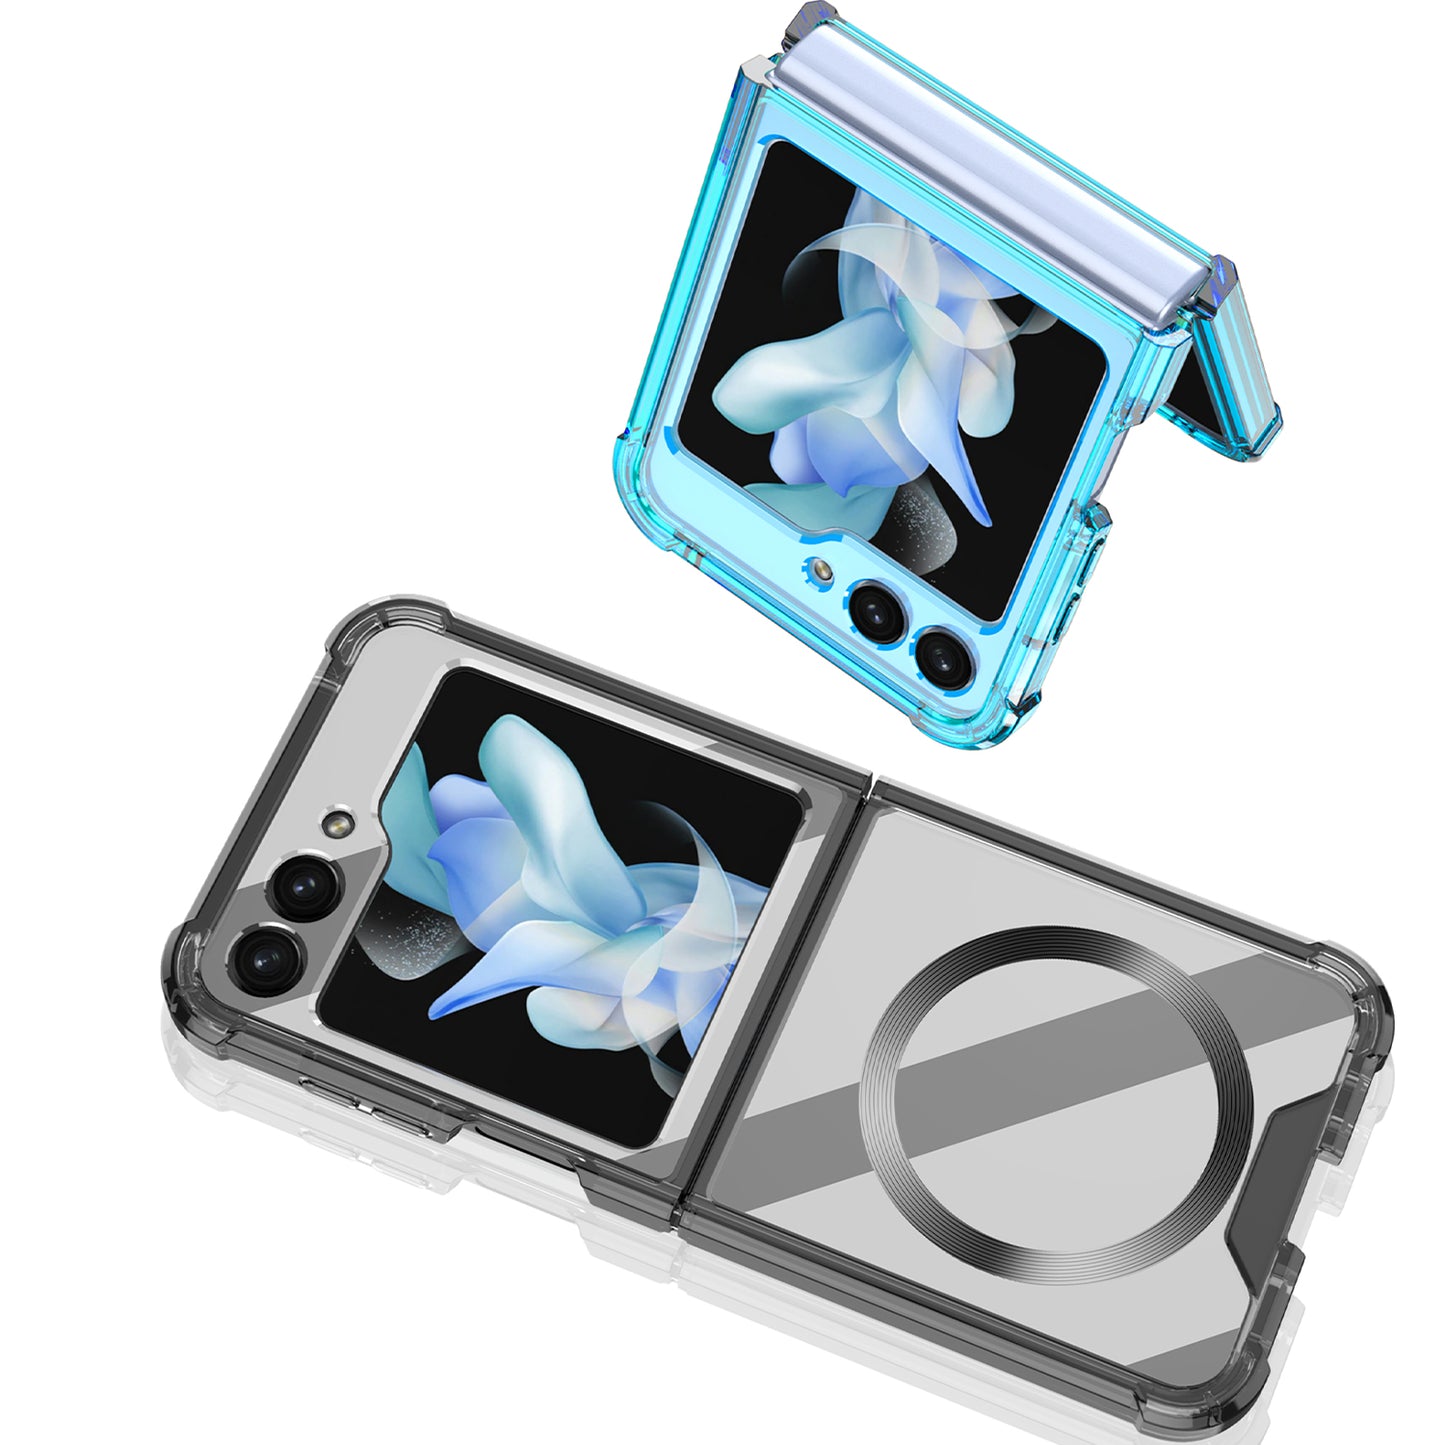 Airbag Anti-Drop Case F or Samsung Galaxy Z Flip5 With Magsafe Function